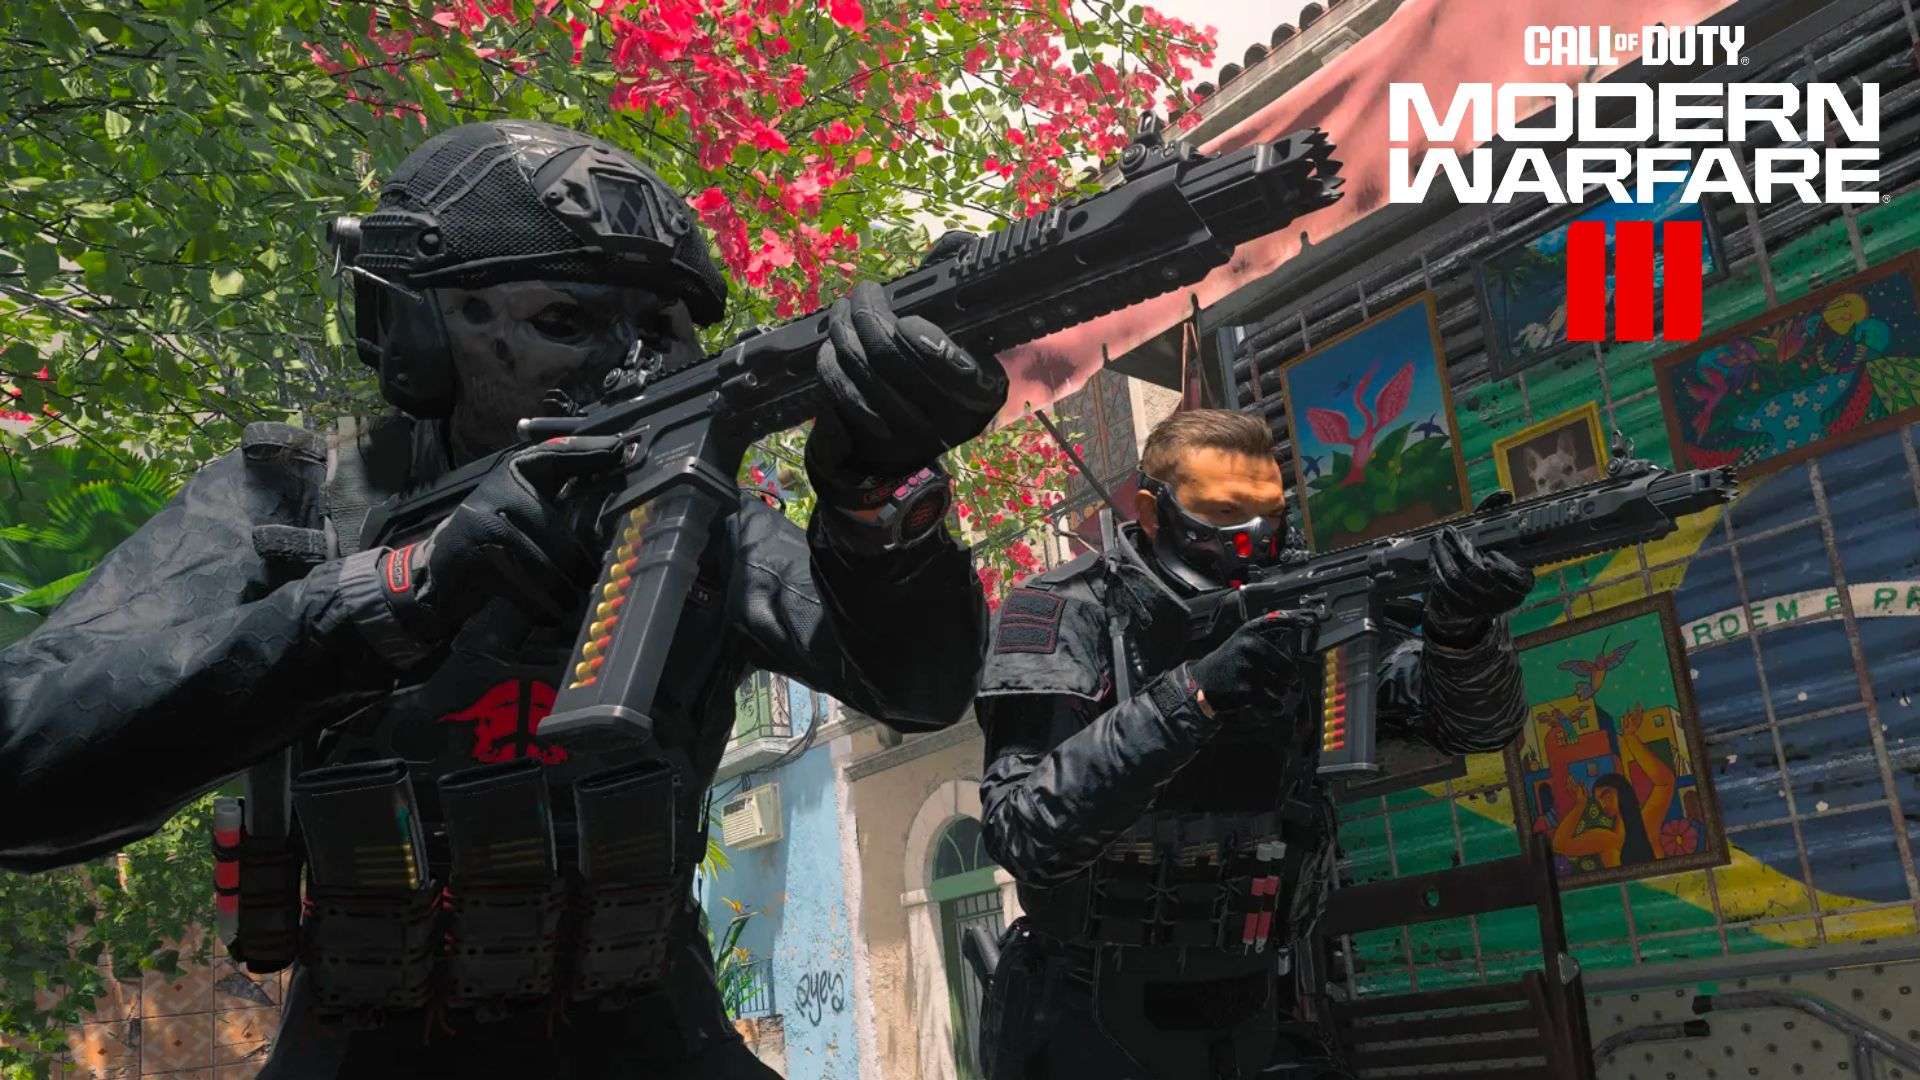 Modern Warfare 3 character aiming weapons on Rio map